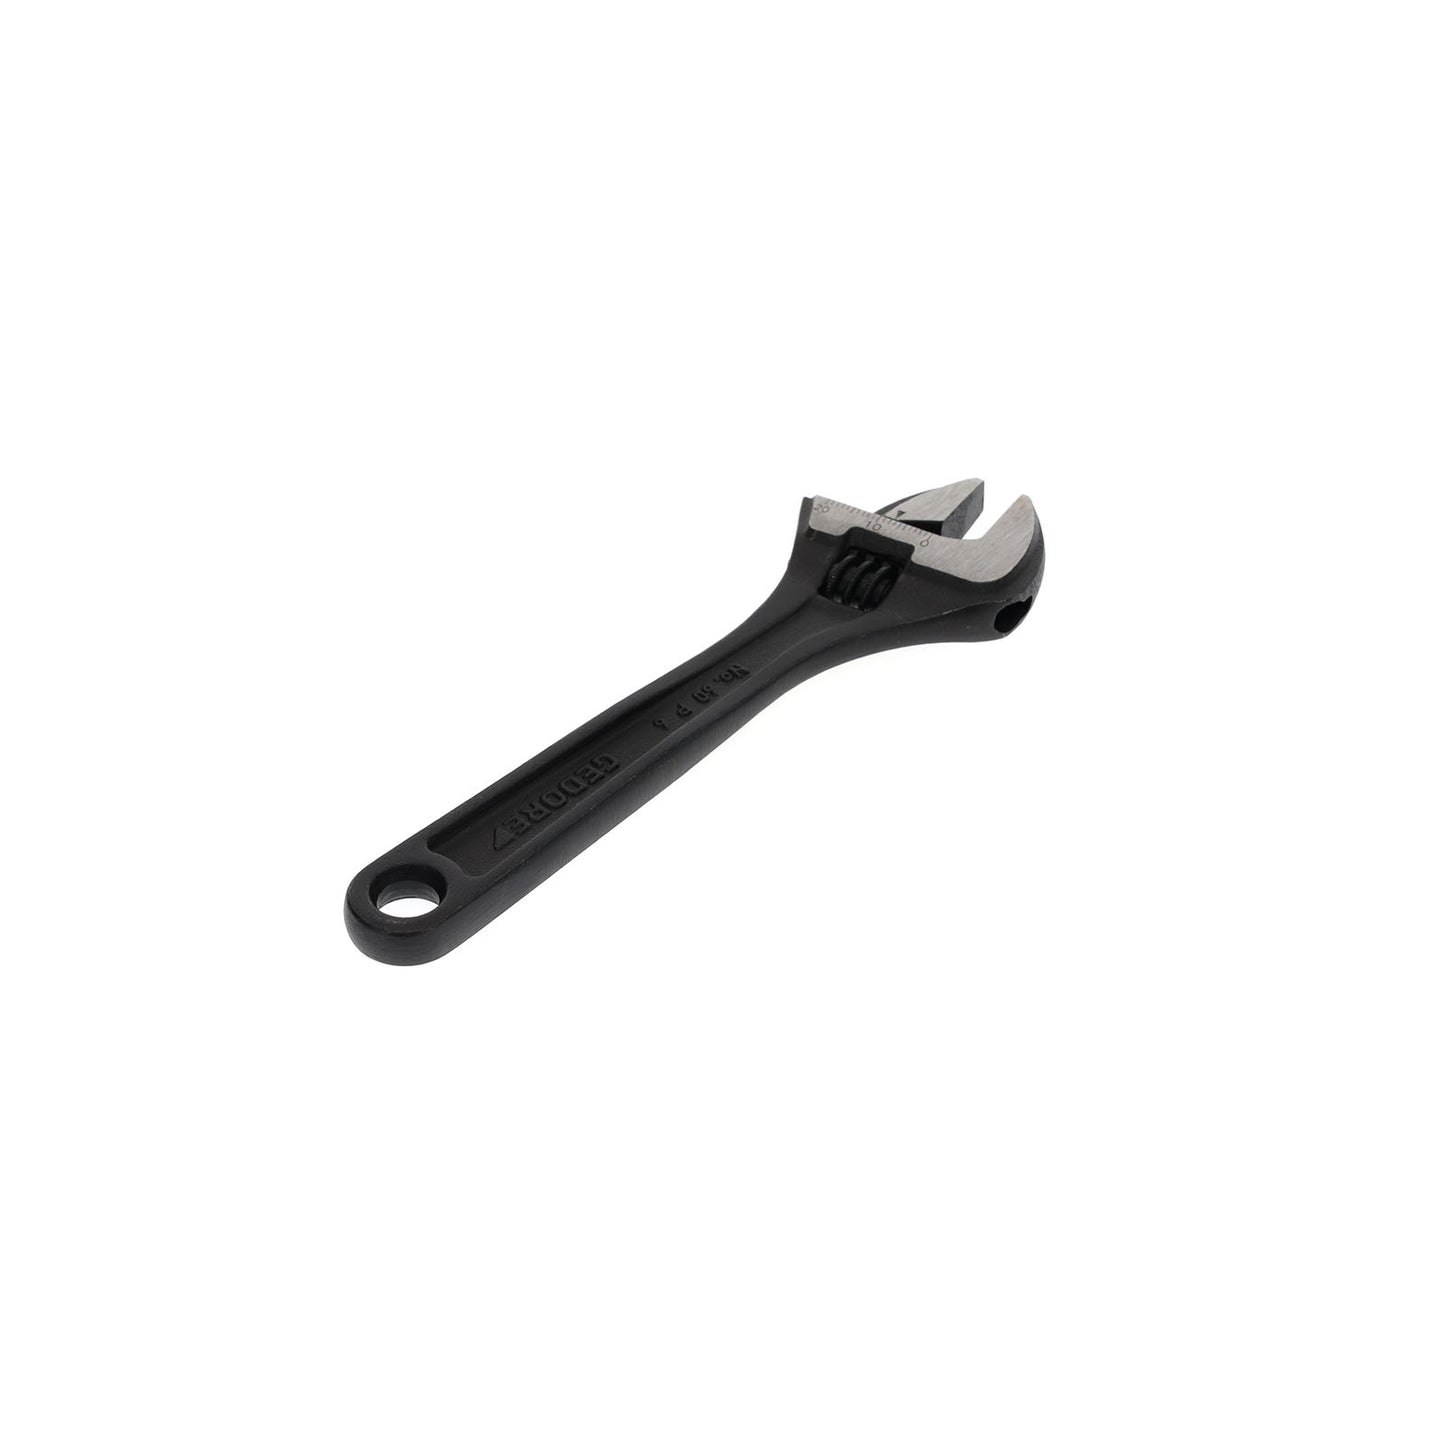 GEDORE 60 P 6 - Phosphated Adjustable Wrench, 6'' (6380560)